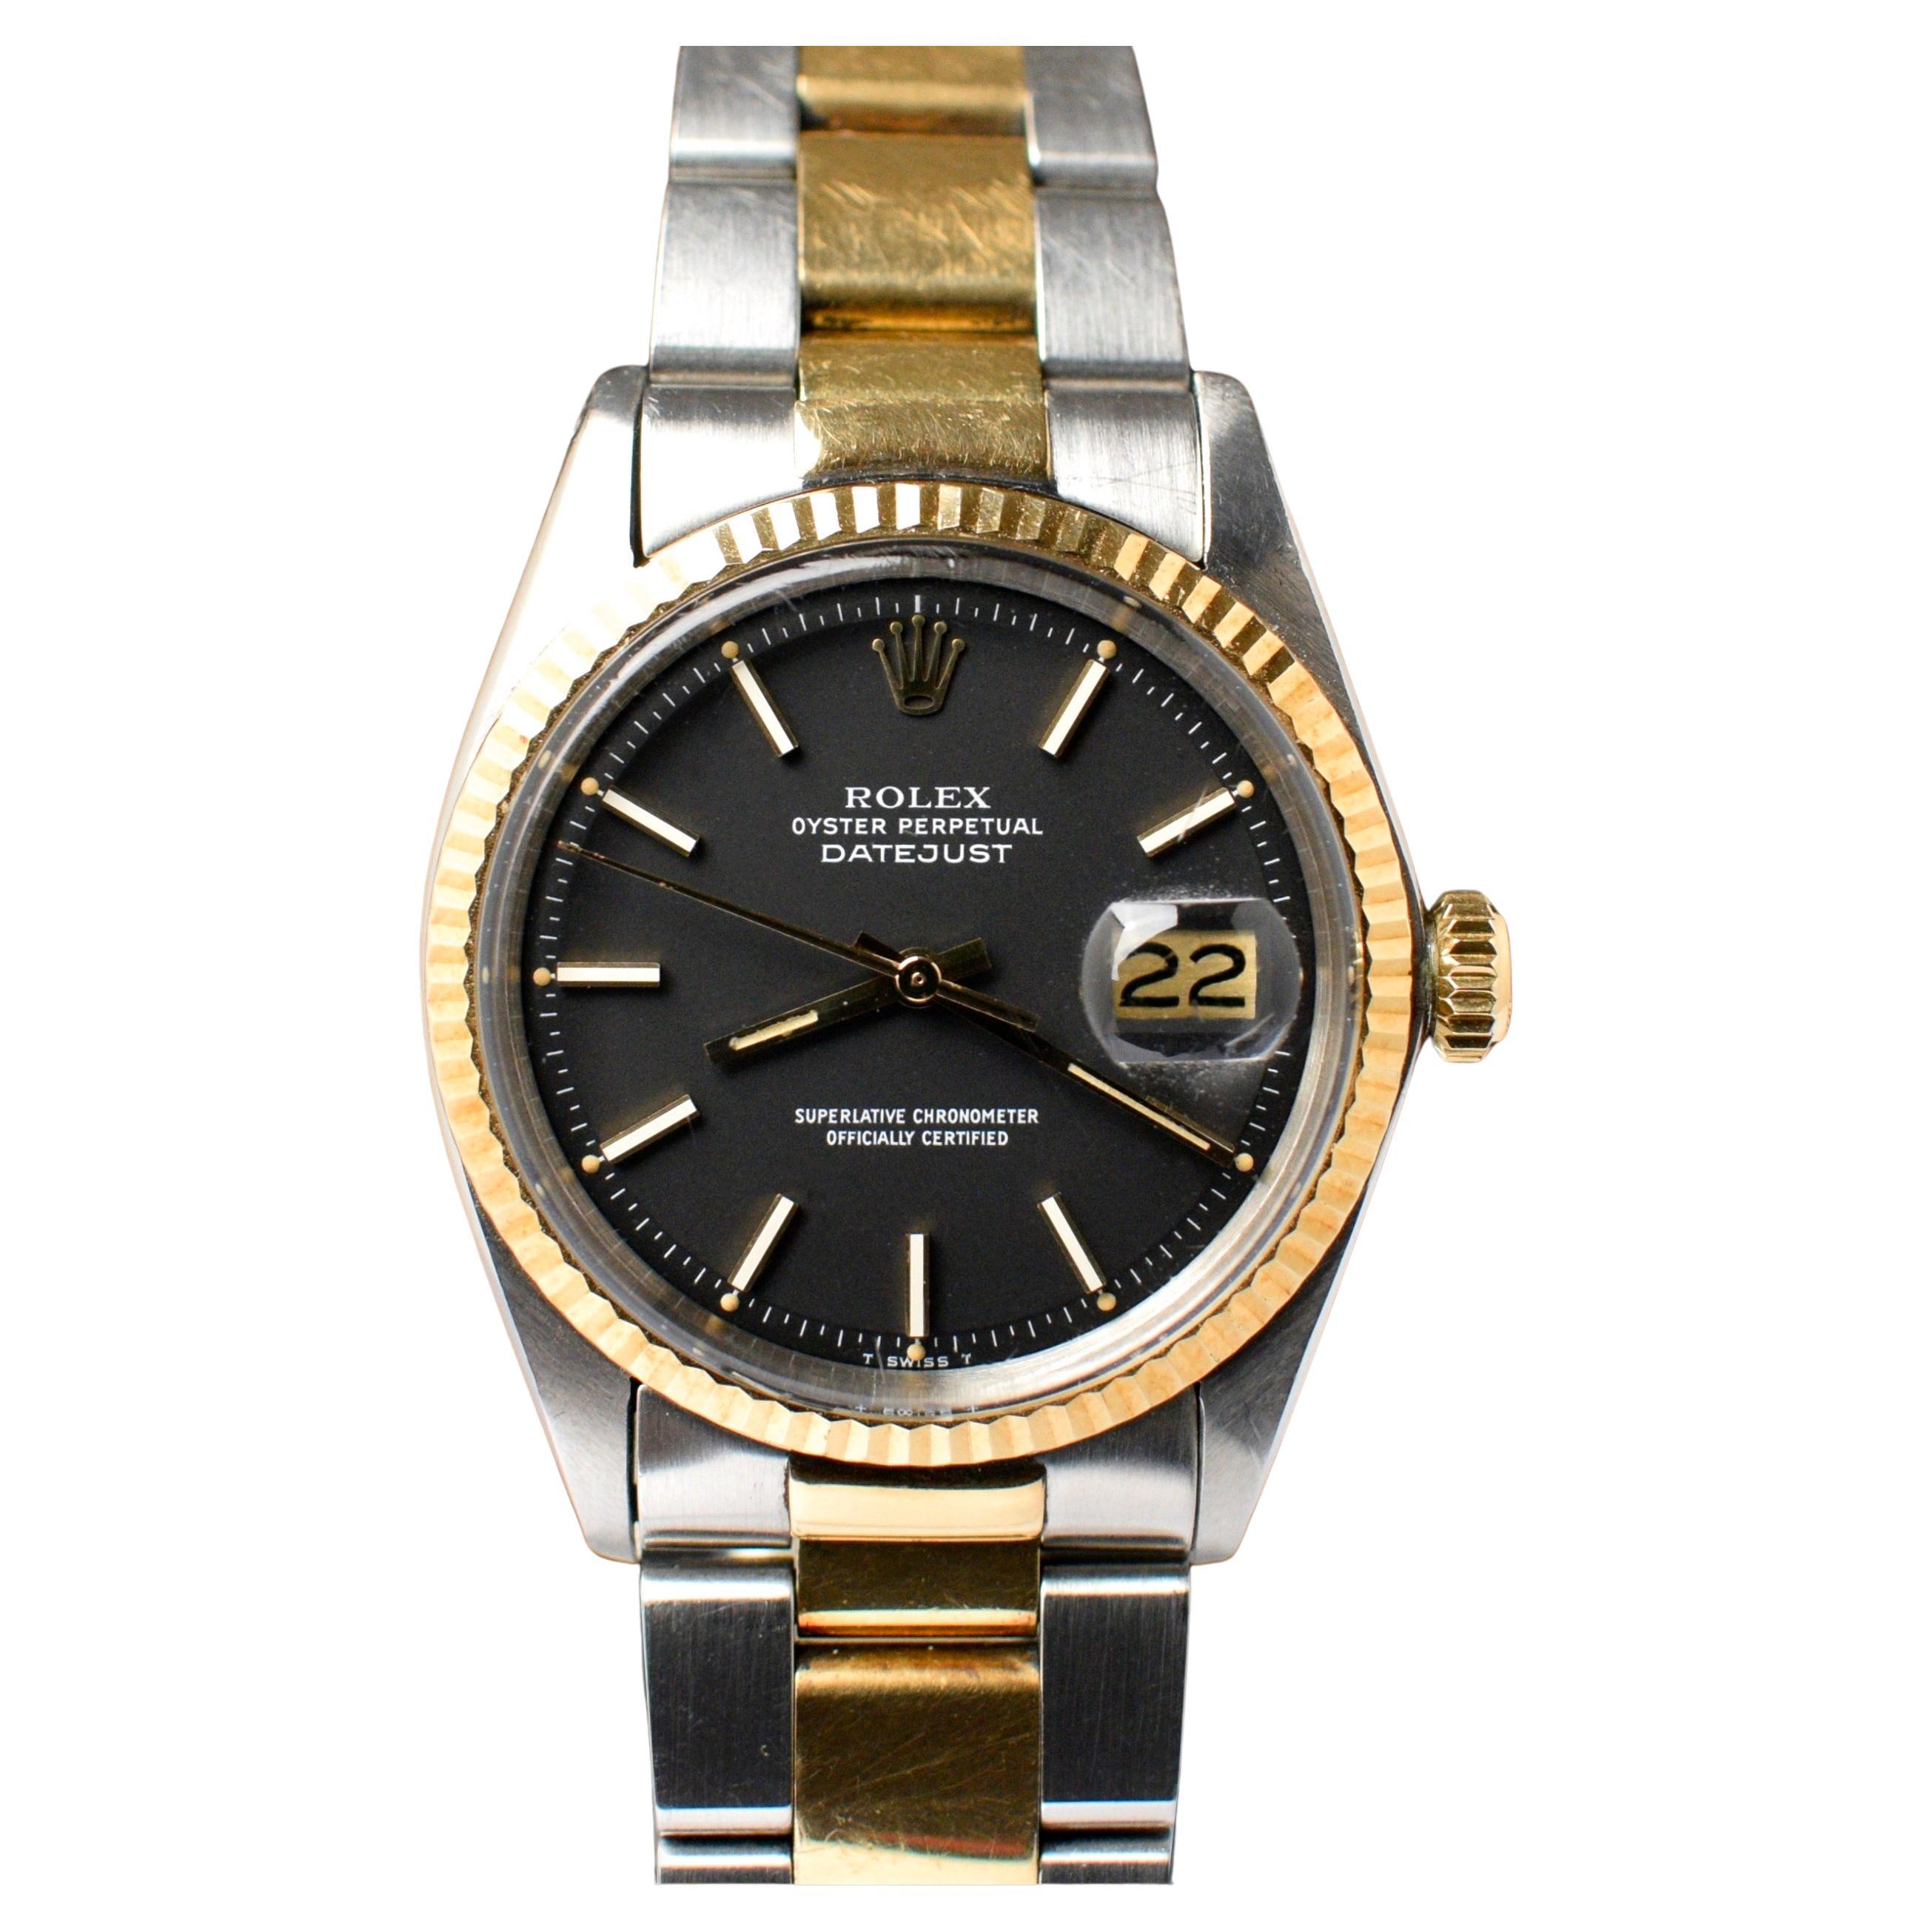 Rolex Perpetual Datejust Matte Black 1601 Yellow Gold Steel Watch, 1973 For Sale at 1stDibs | rolex perpetual serial rolex oyster perpetual datejust 1973, rolex oyster perpetual datejust serial number